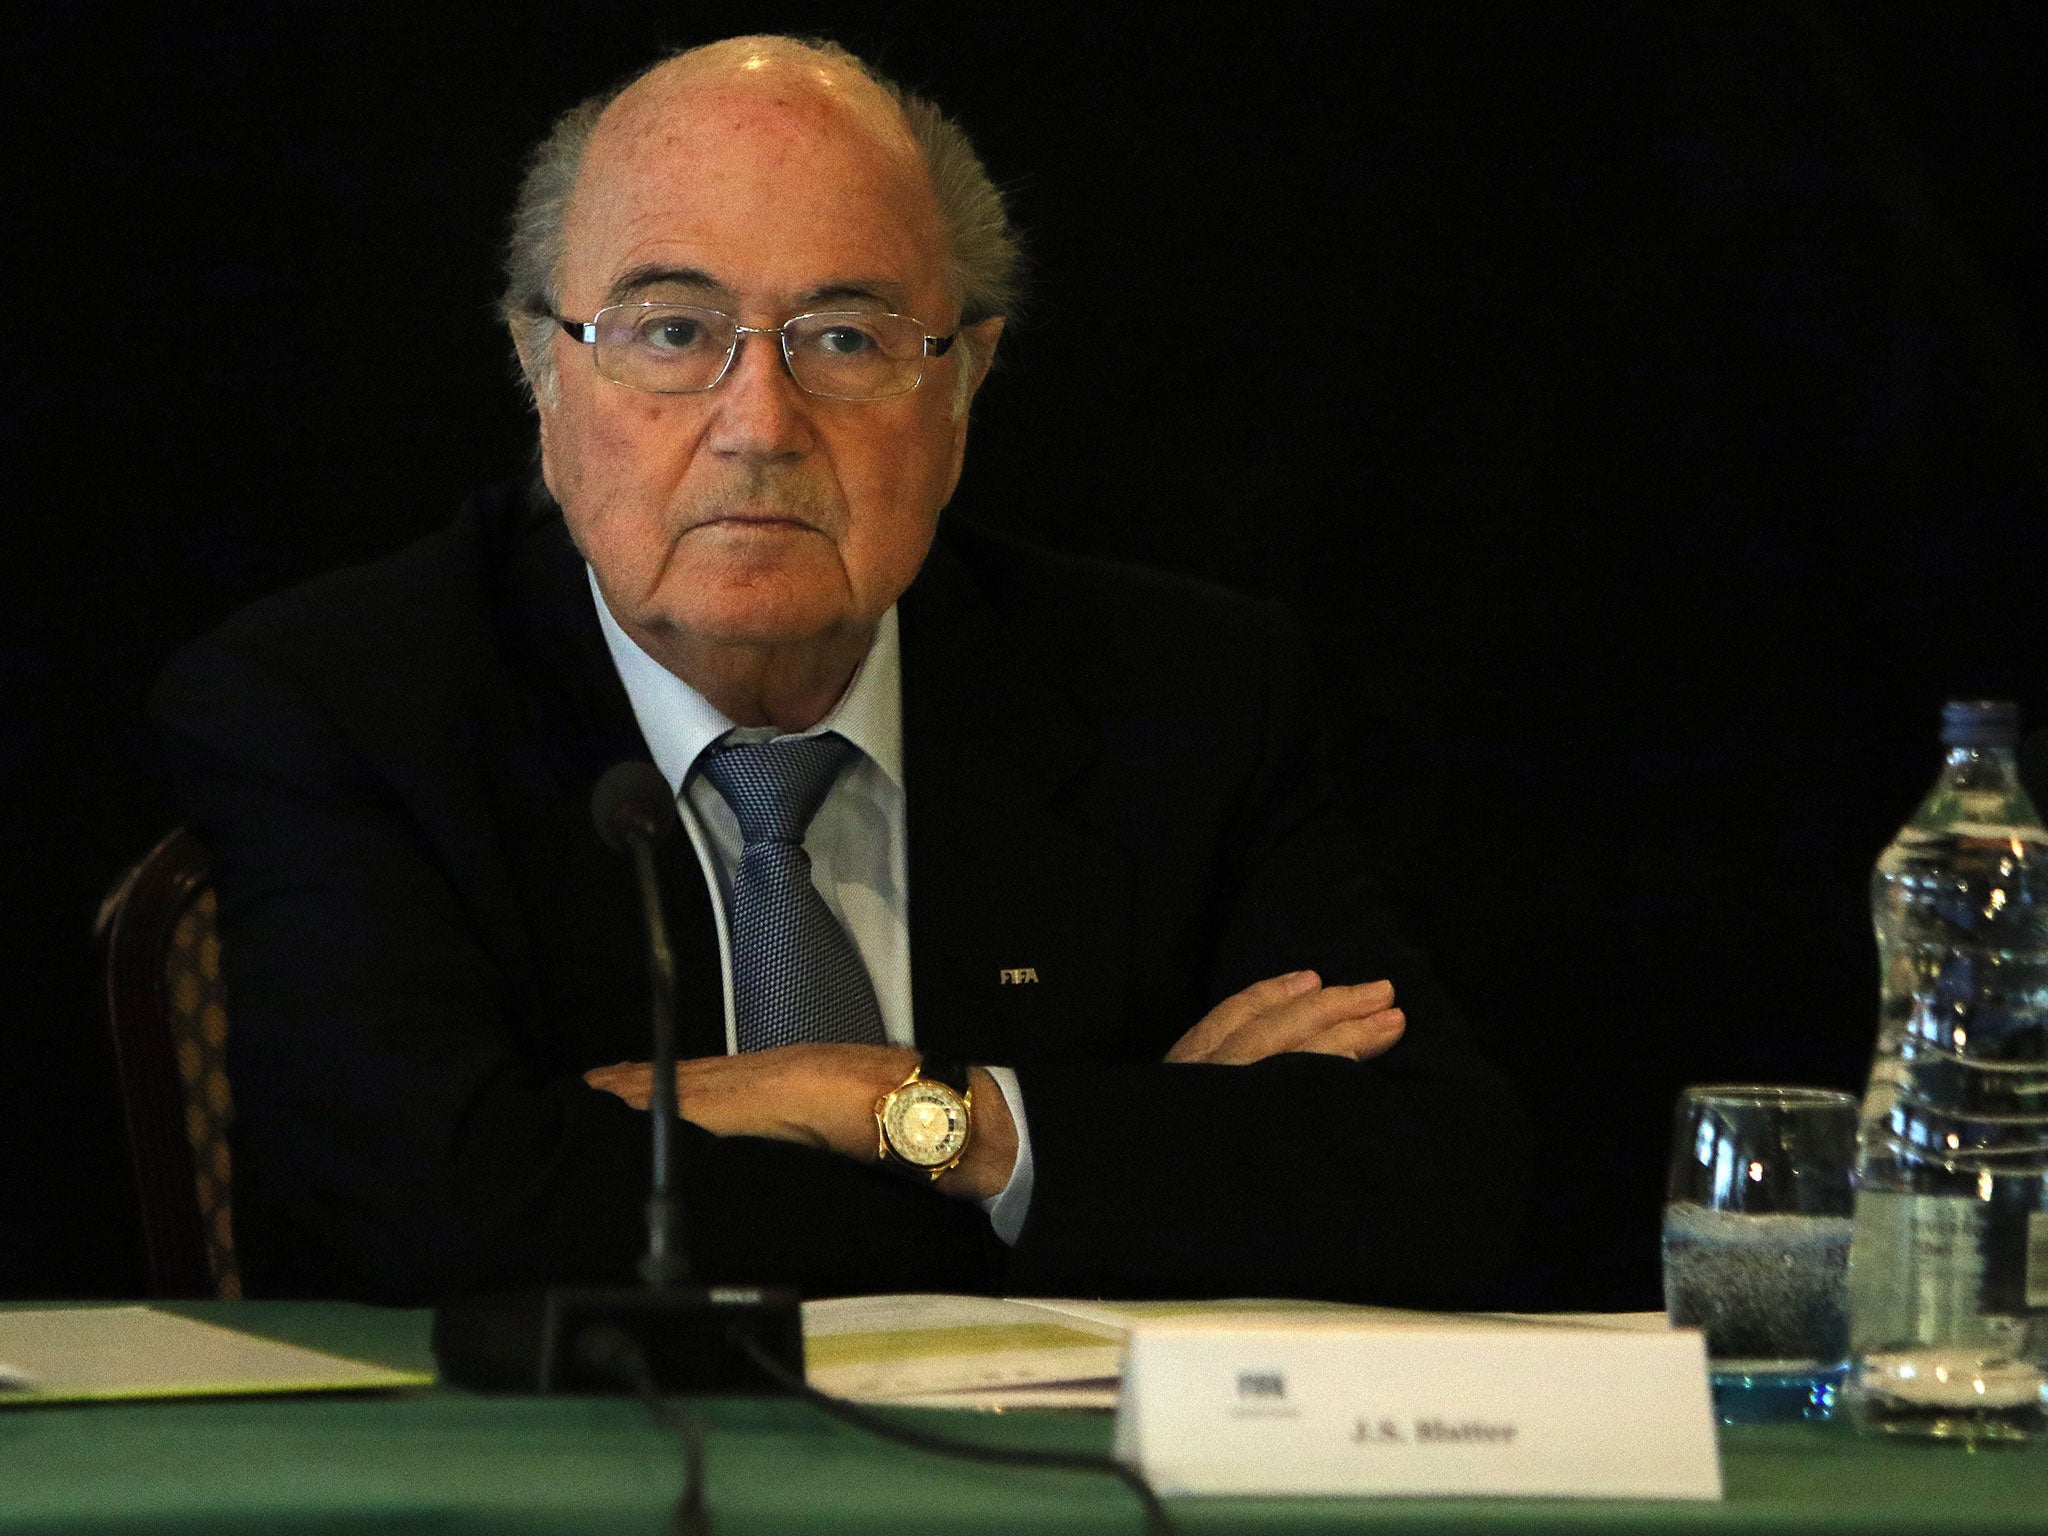 Sepp Blatter at the IFAB meeting in Northern Ireland